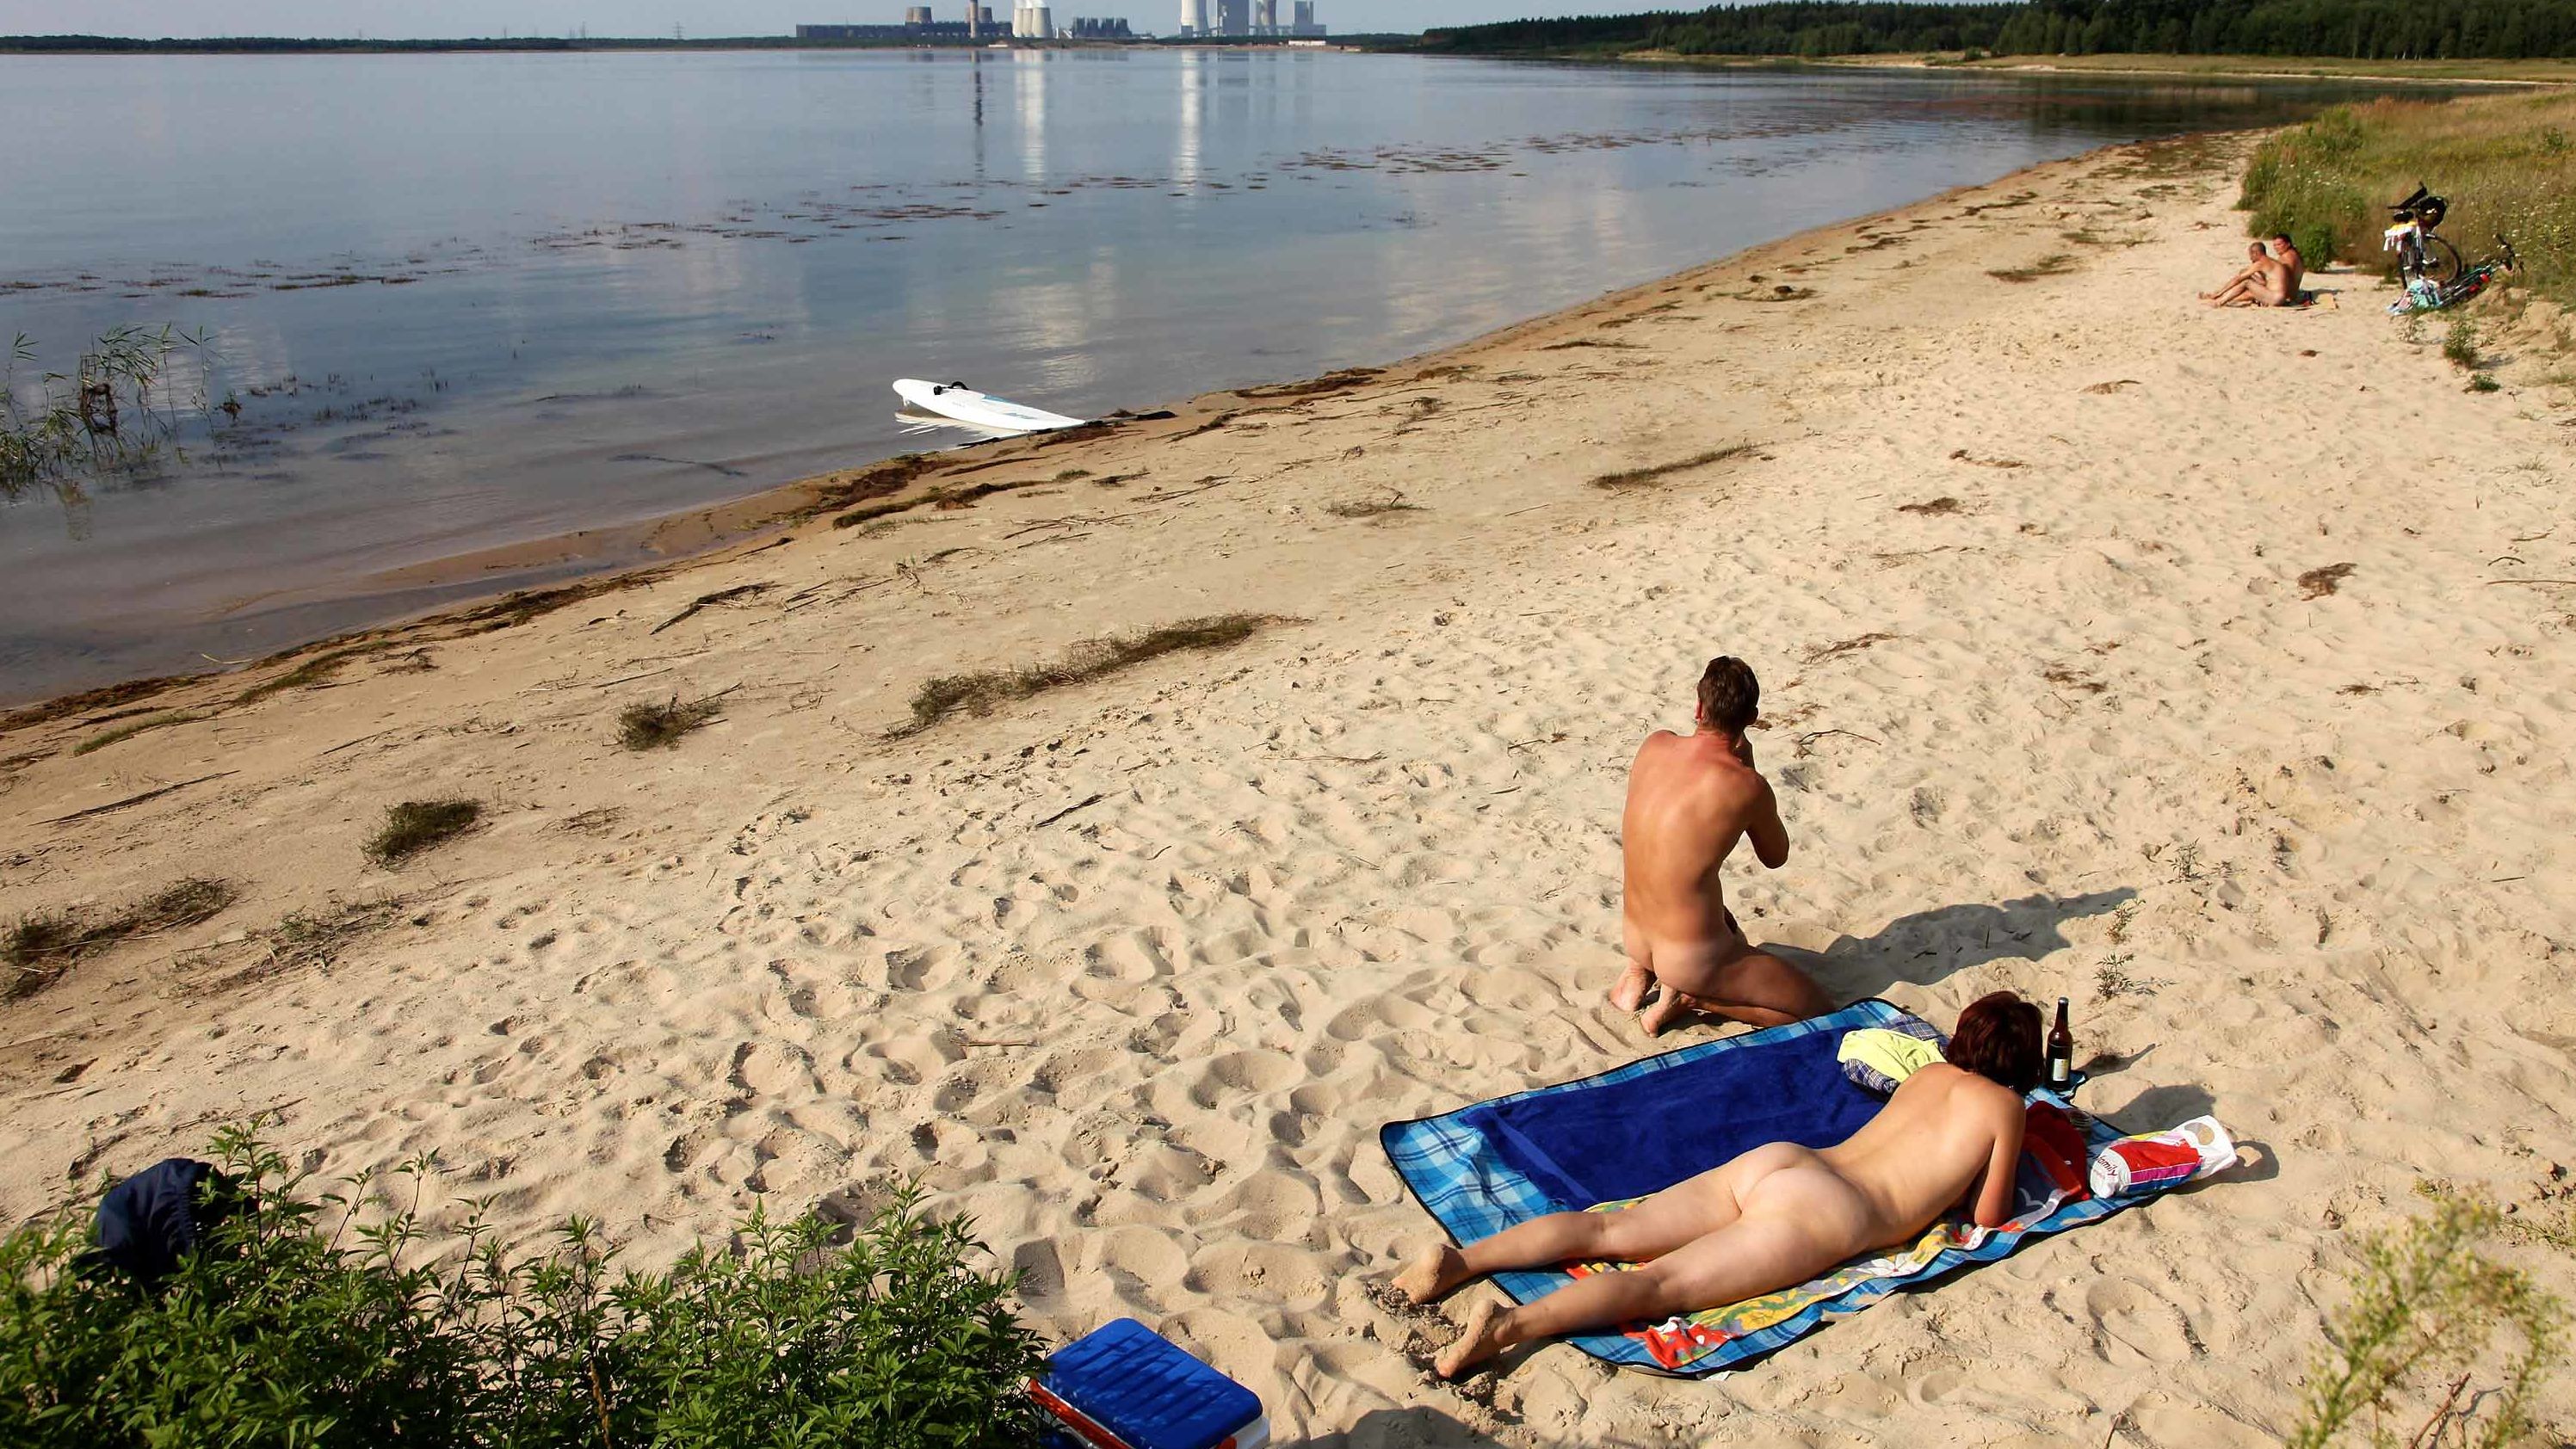 Nudist Group Swimming - Nudity in Germany: The naked truth is revealed | CNN